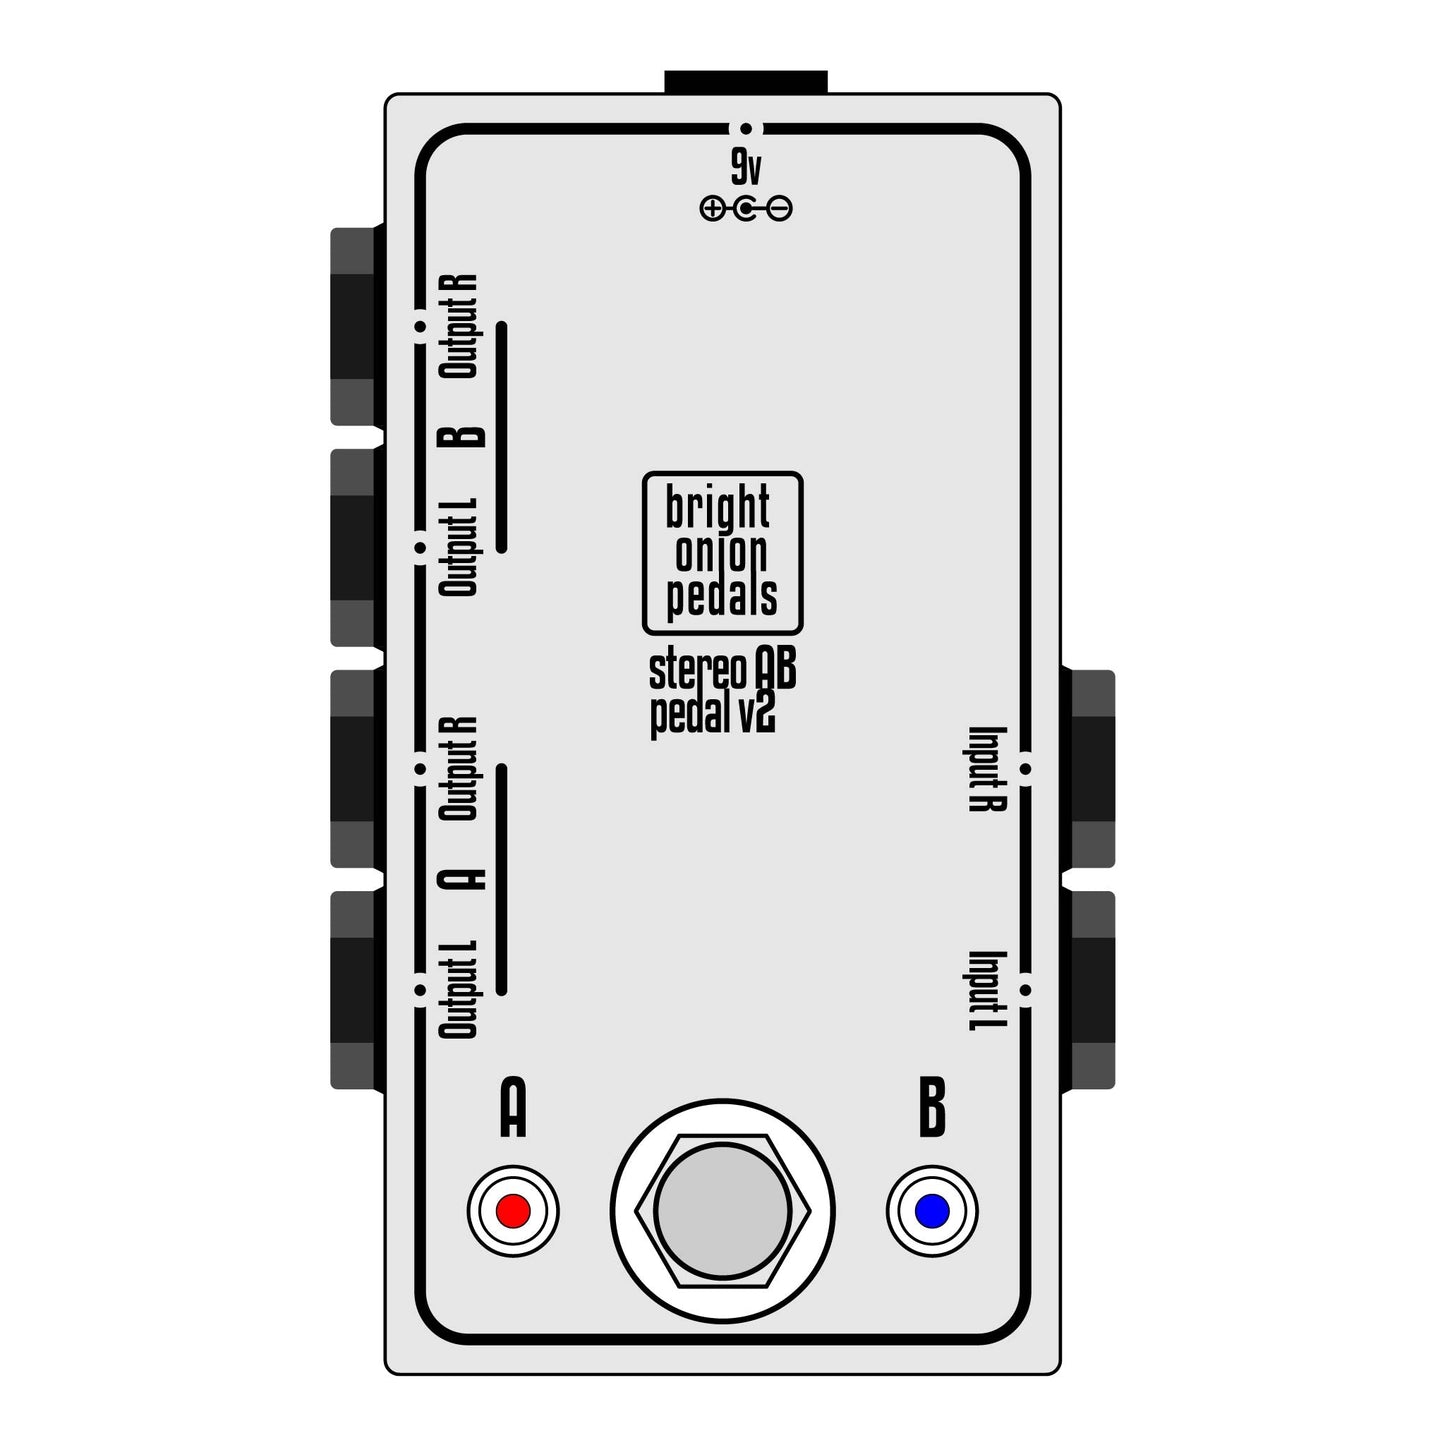 Stereo AB Output Switch v2 - Bright Onion Pedals